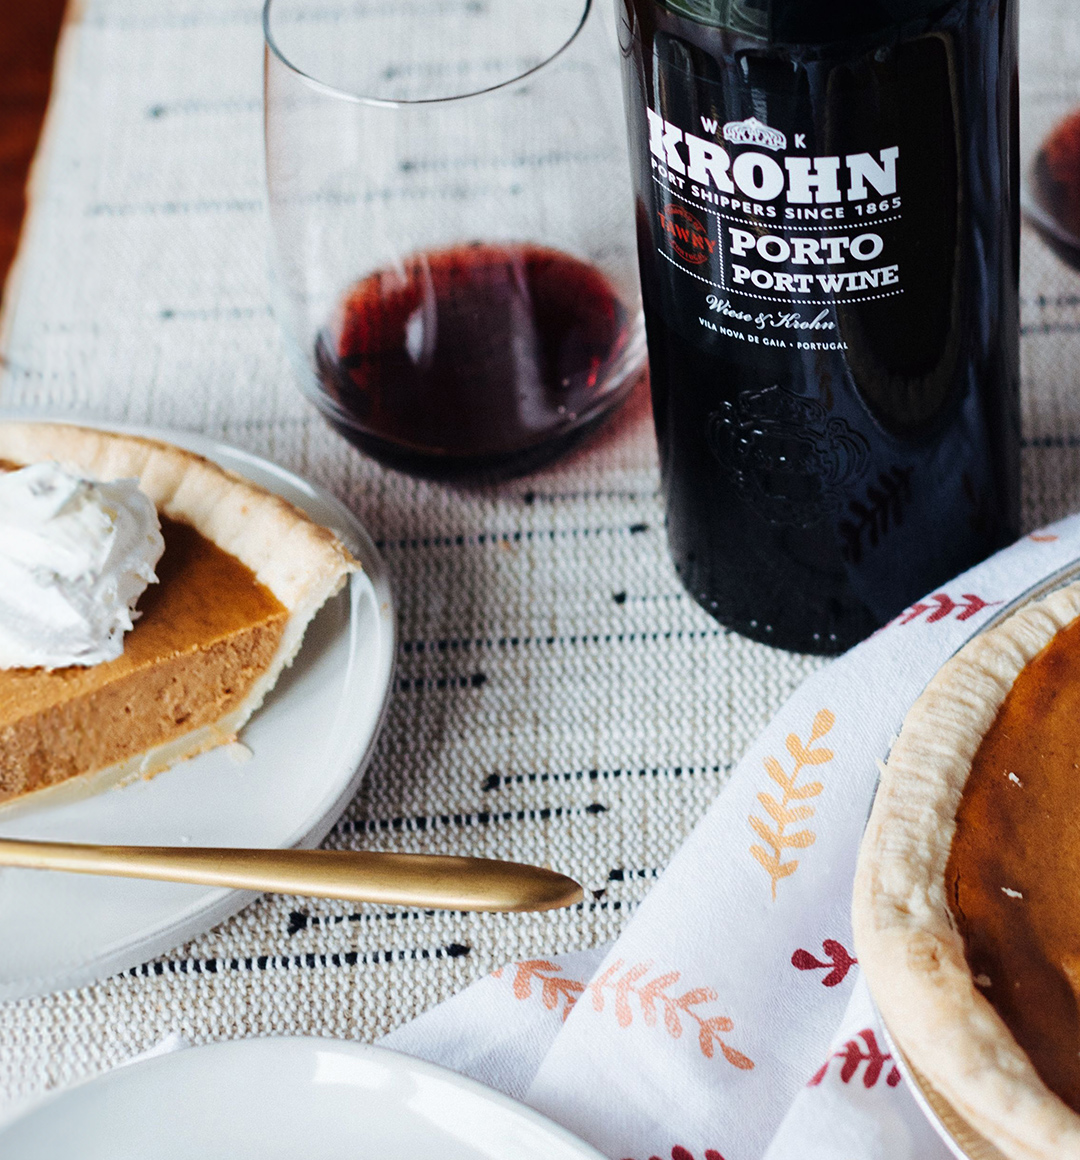 A bottle of port wine on a table next to a stemless wine glass filled with port and a plate with a slice of pumpkin pie.